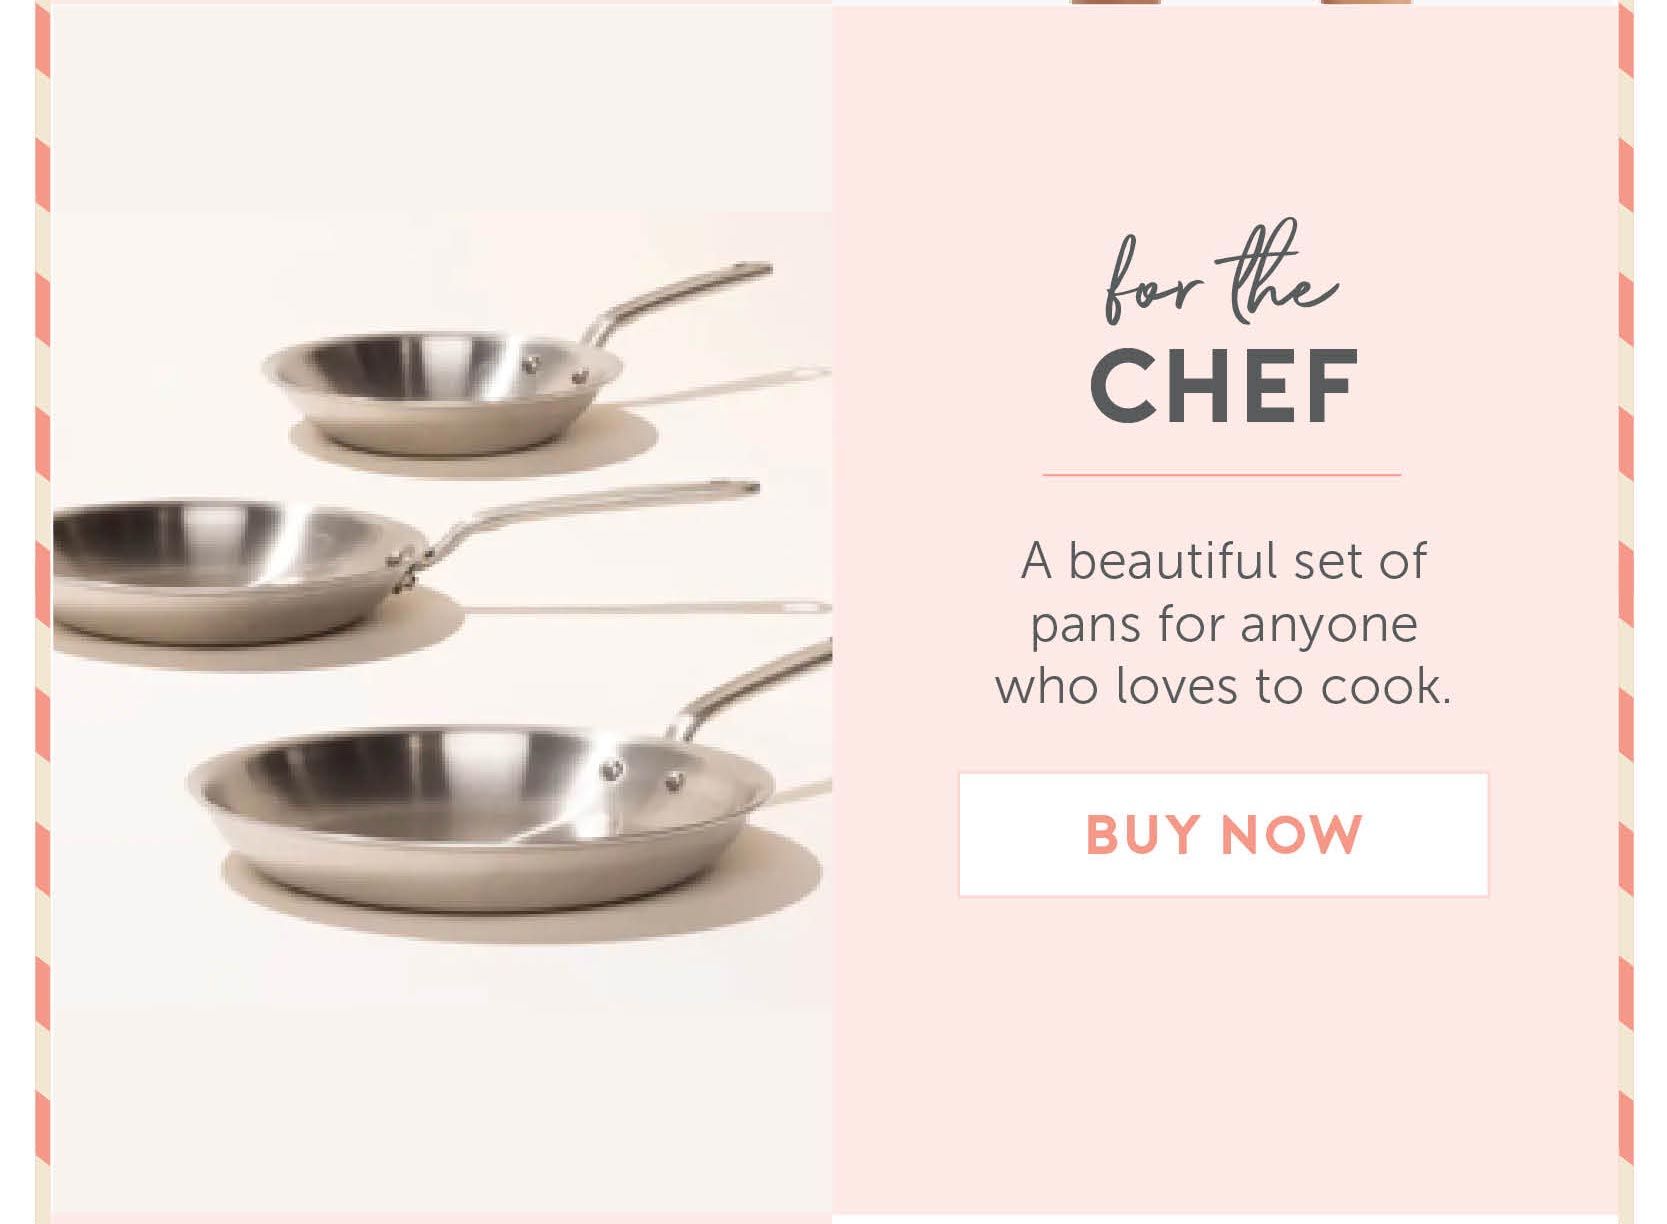 For someone who loves to cook. A beautiful set of pans for anyone who loves to cook.